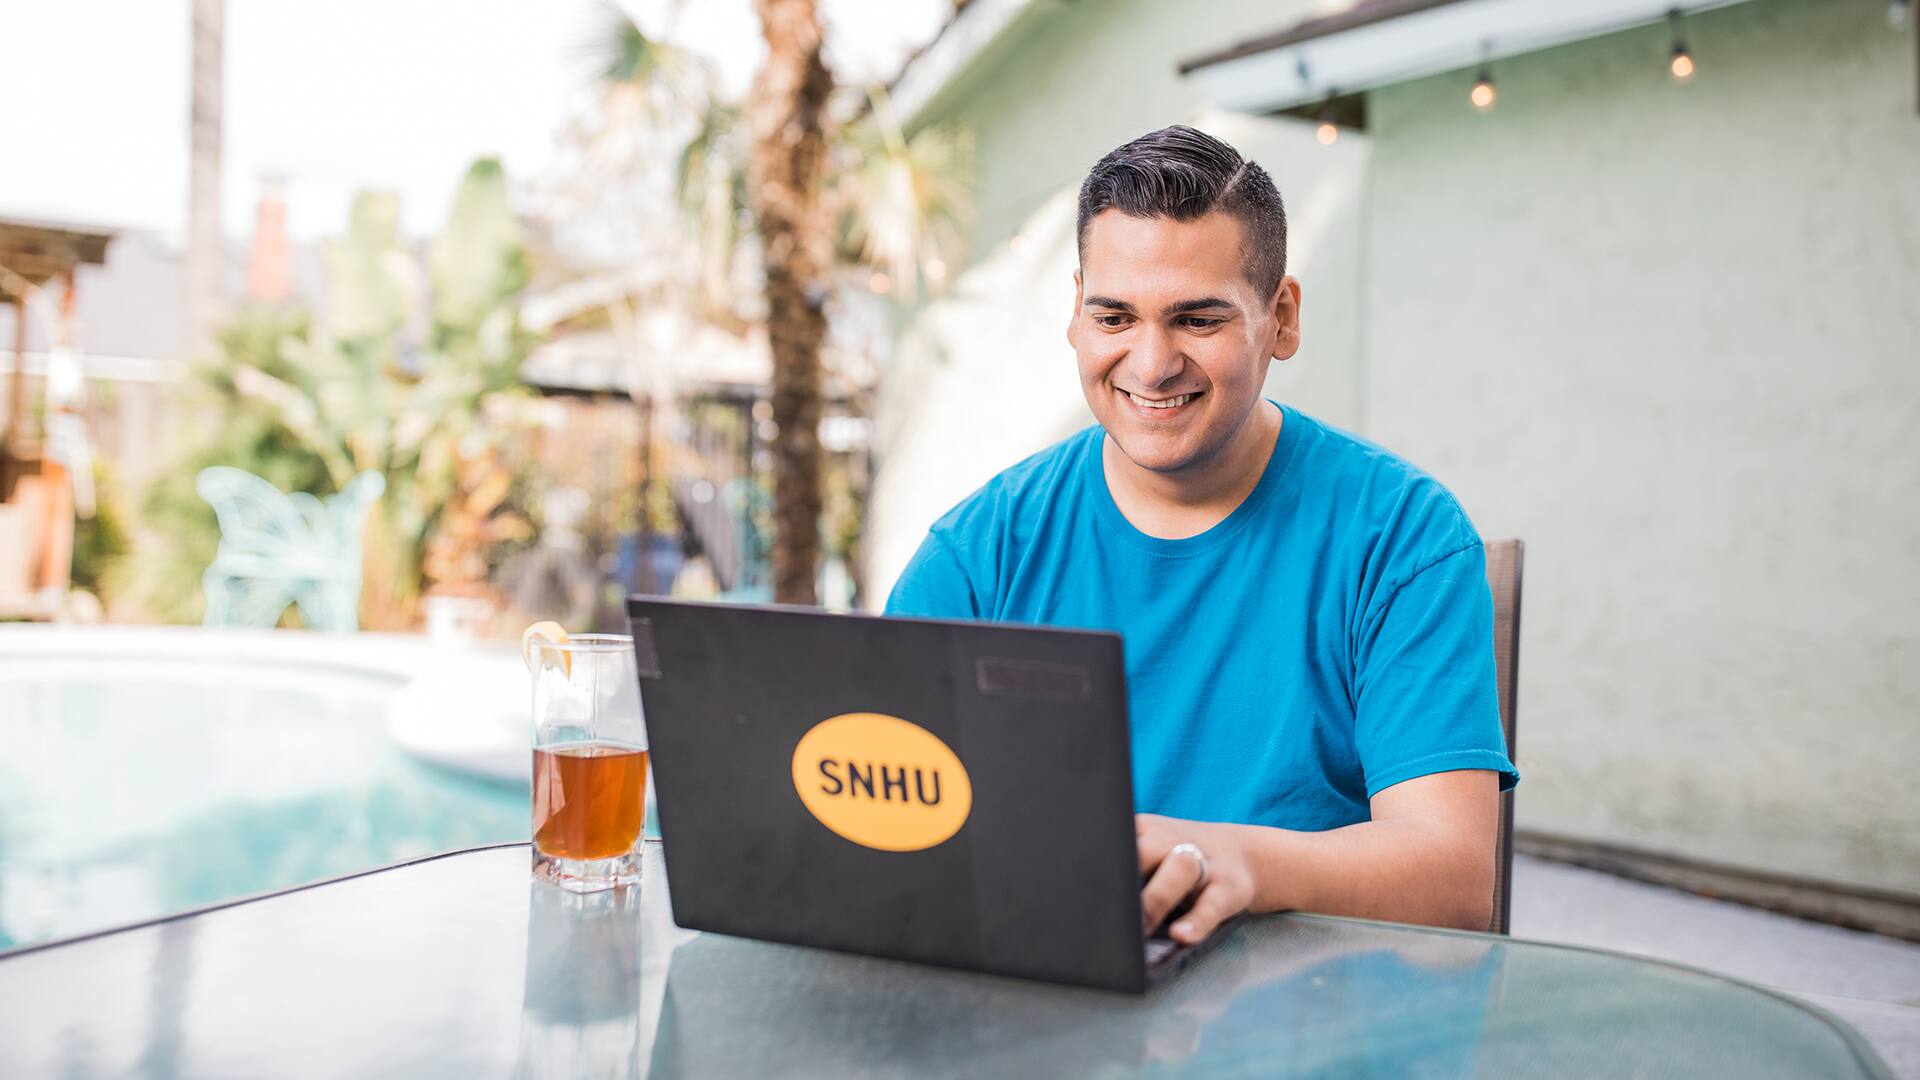 Juan Munoz, who earned his degree from SNHU, sitting at an outdoor table typing on a laptop with an SNHU sticker on the front and a glass of iced tea next to him and a pool in the background.